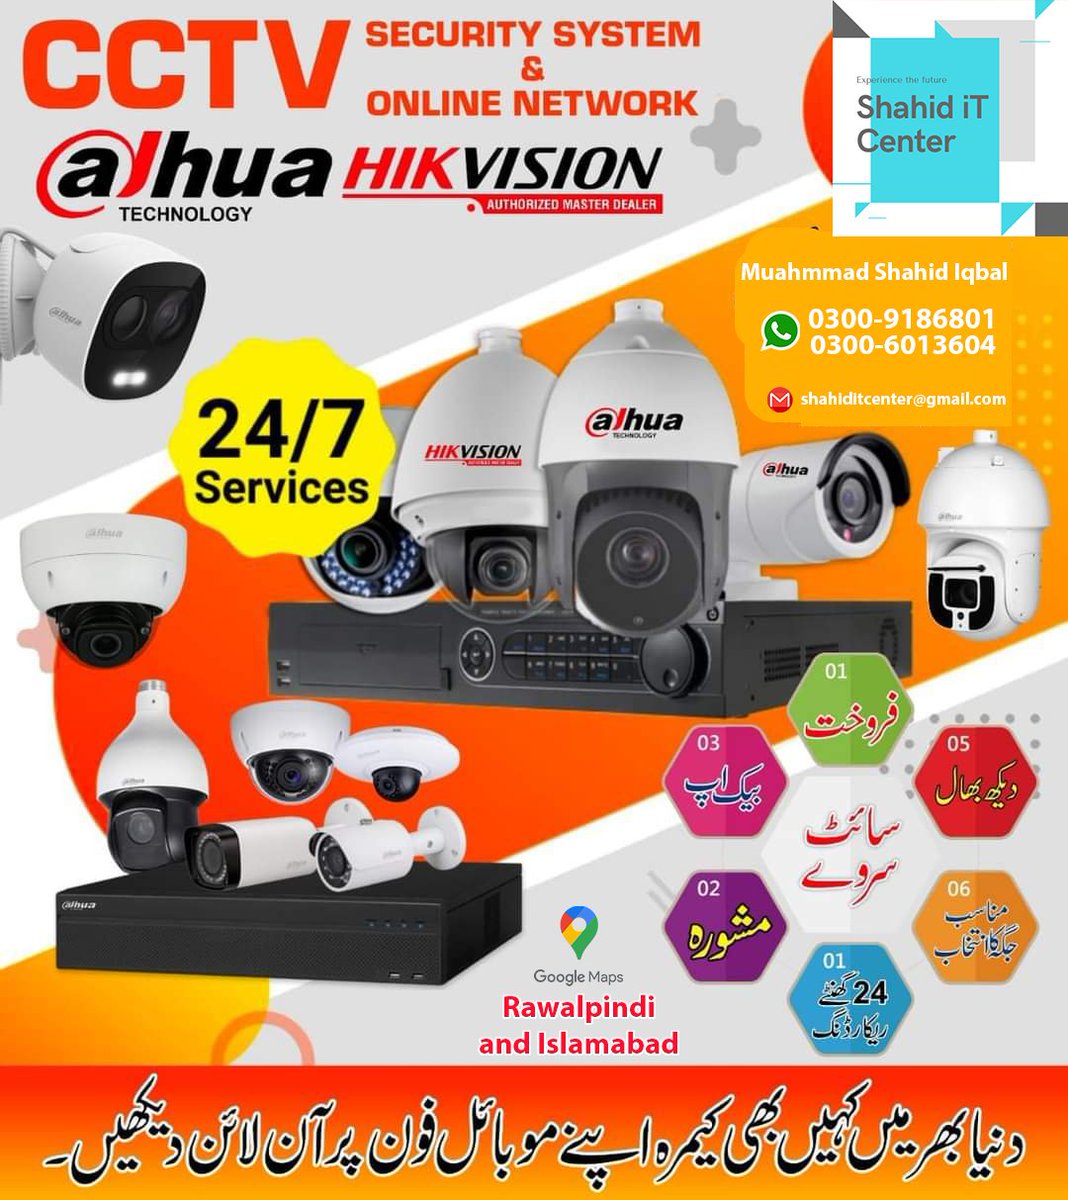 #letsgrow #online #onlinestore #onlineshop #onlineearning #CCTVCamera #CCTVSecurity #cctvcamerainstallation #cctvsystems #Dahua #dahuacctv #HIKVISION #hikvisioncctv #hikvisioncamera #Pollo #letsgo #letsconnect #LetsGrowTogether #colorful #imou #graphics  #graphicdesign #post